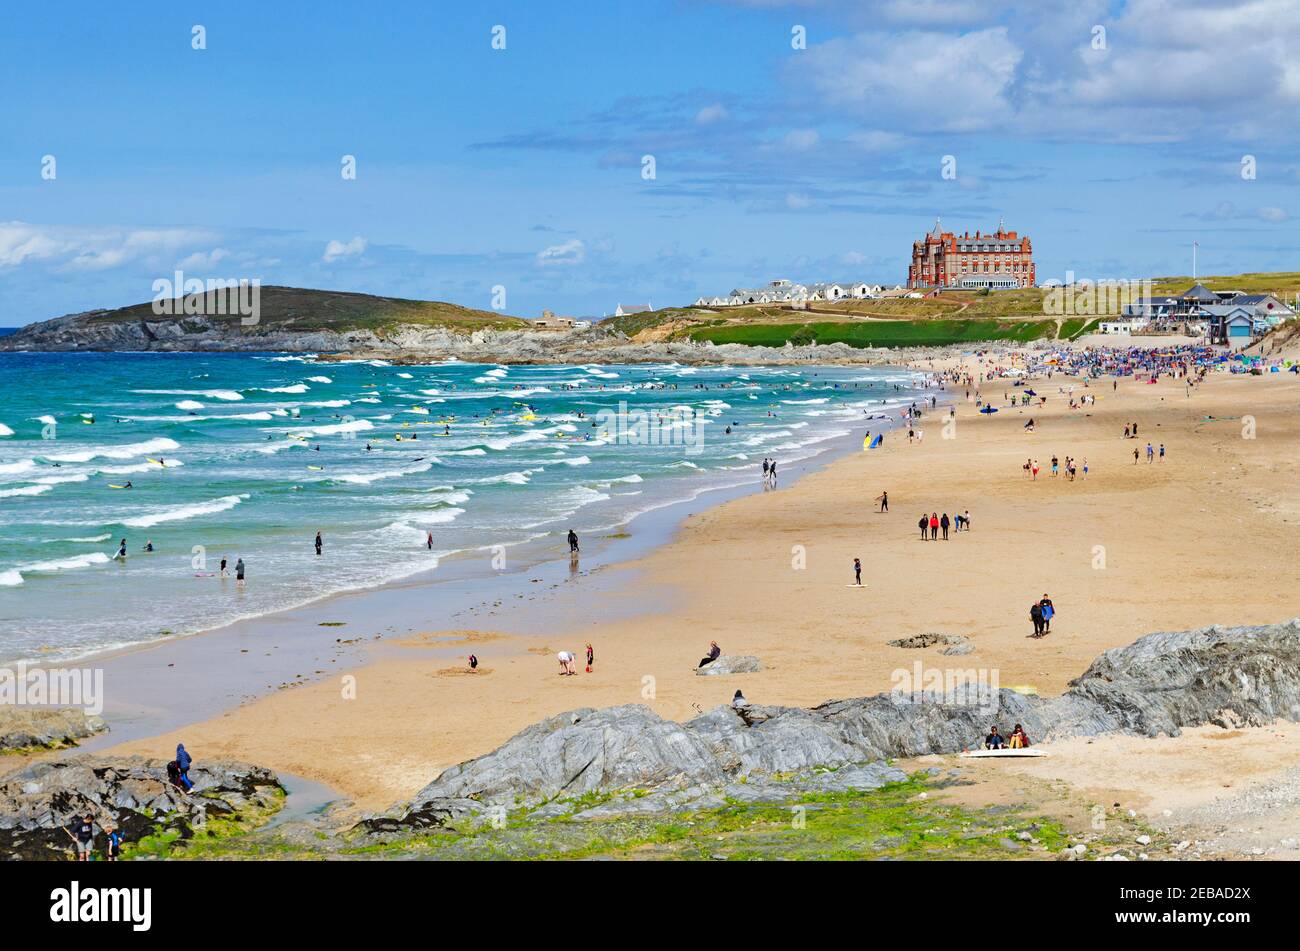 A sunny summer day at  fistral beach in newquay cornwall england Stock Photo